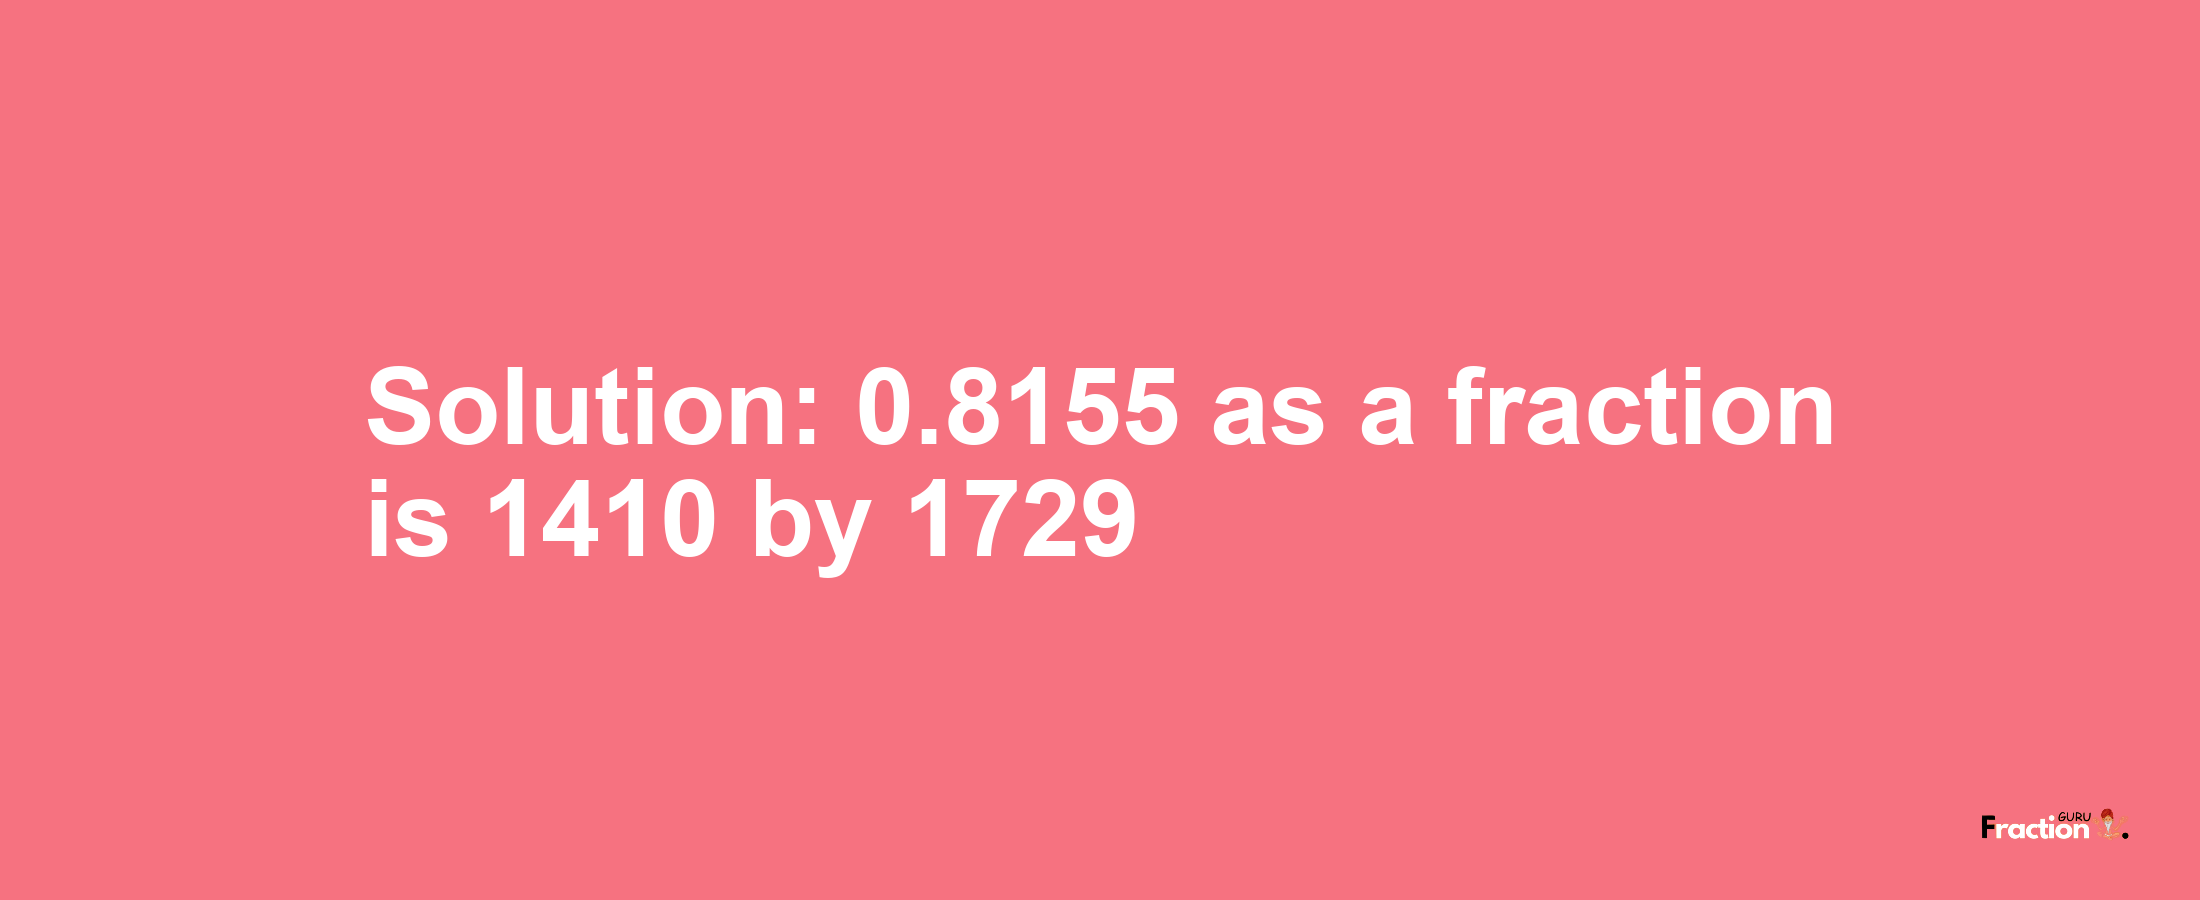 Solution:0.8155 as a fraction is 1410/1729